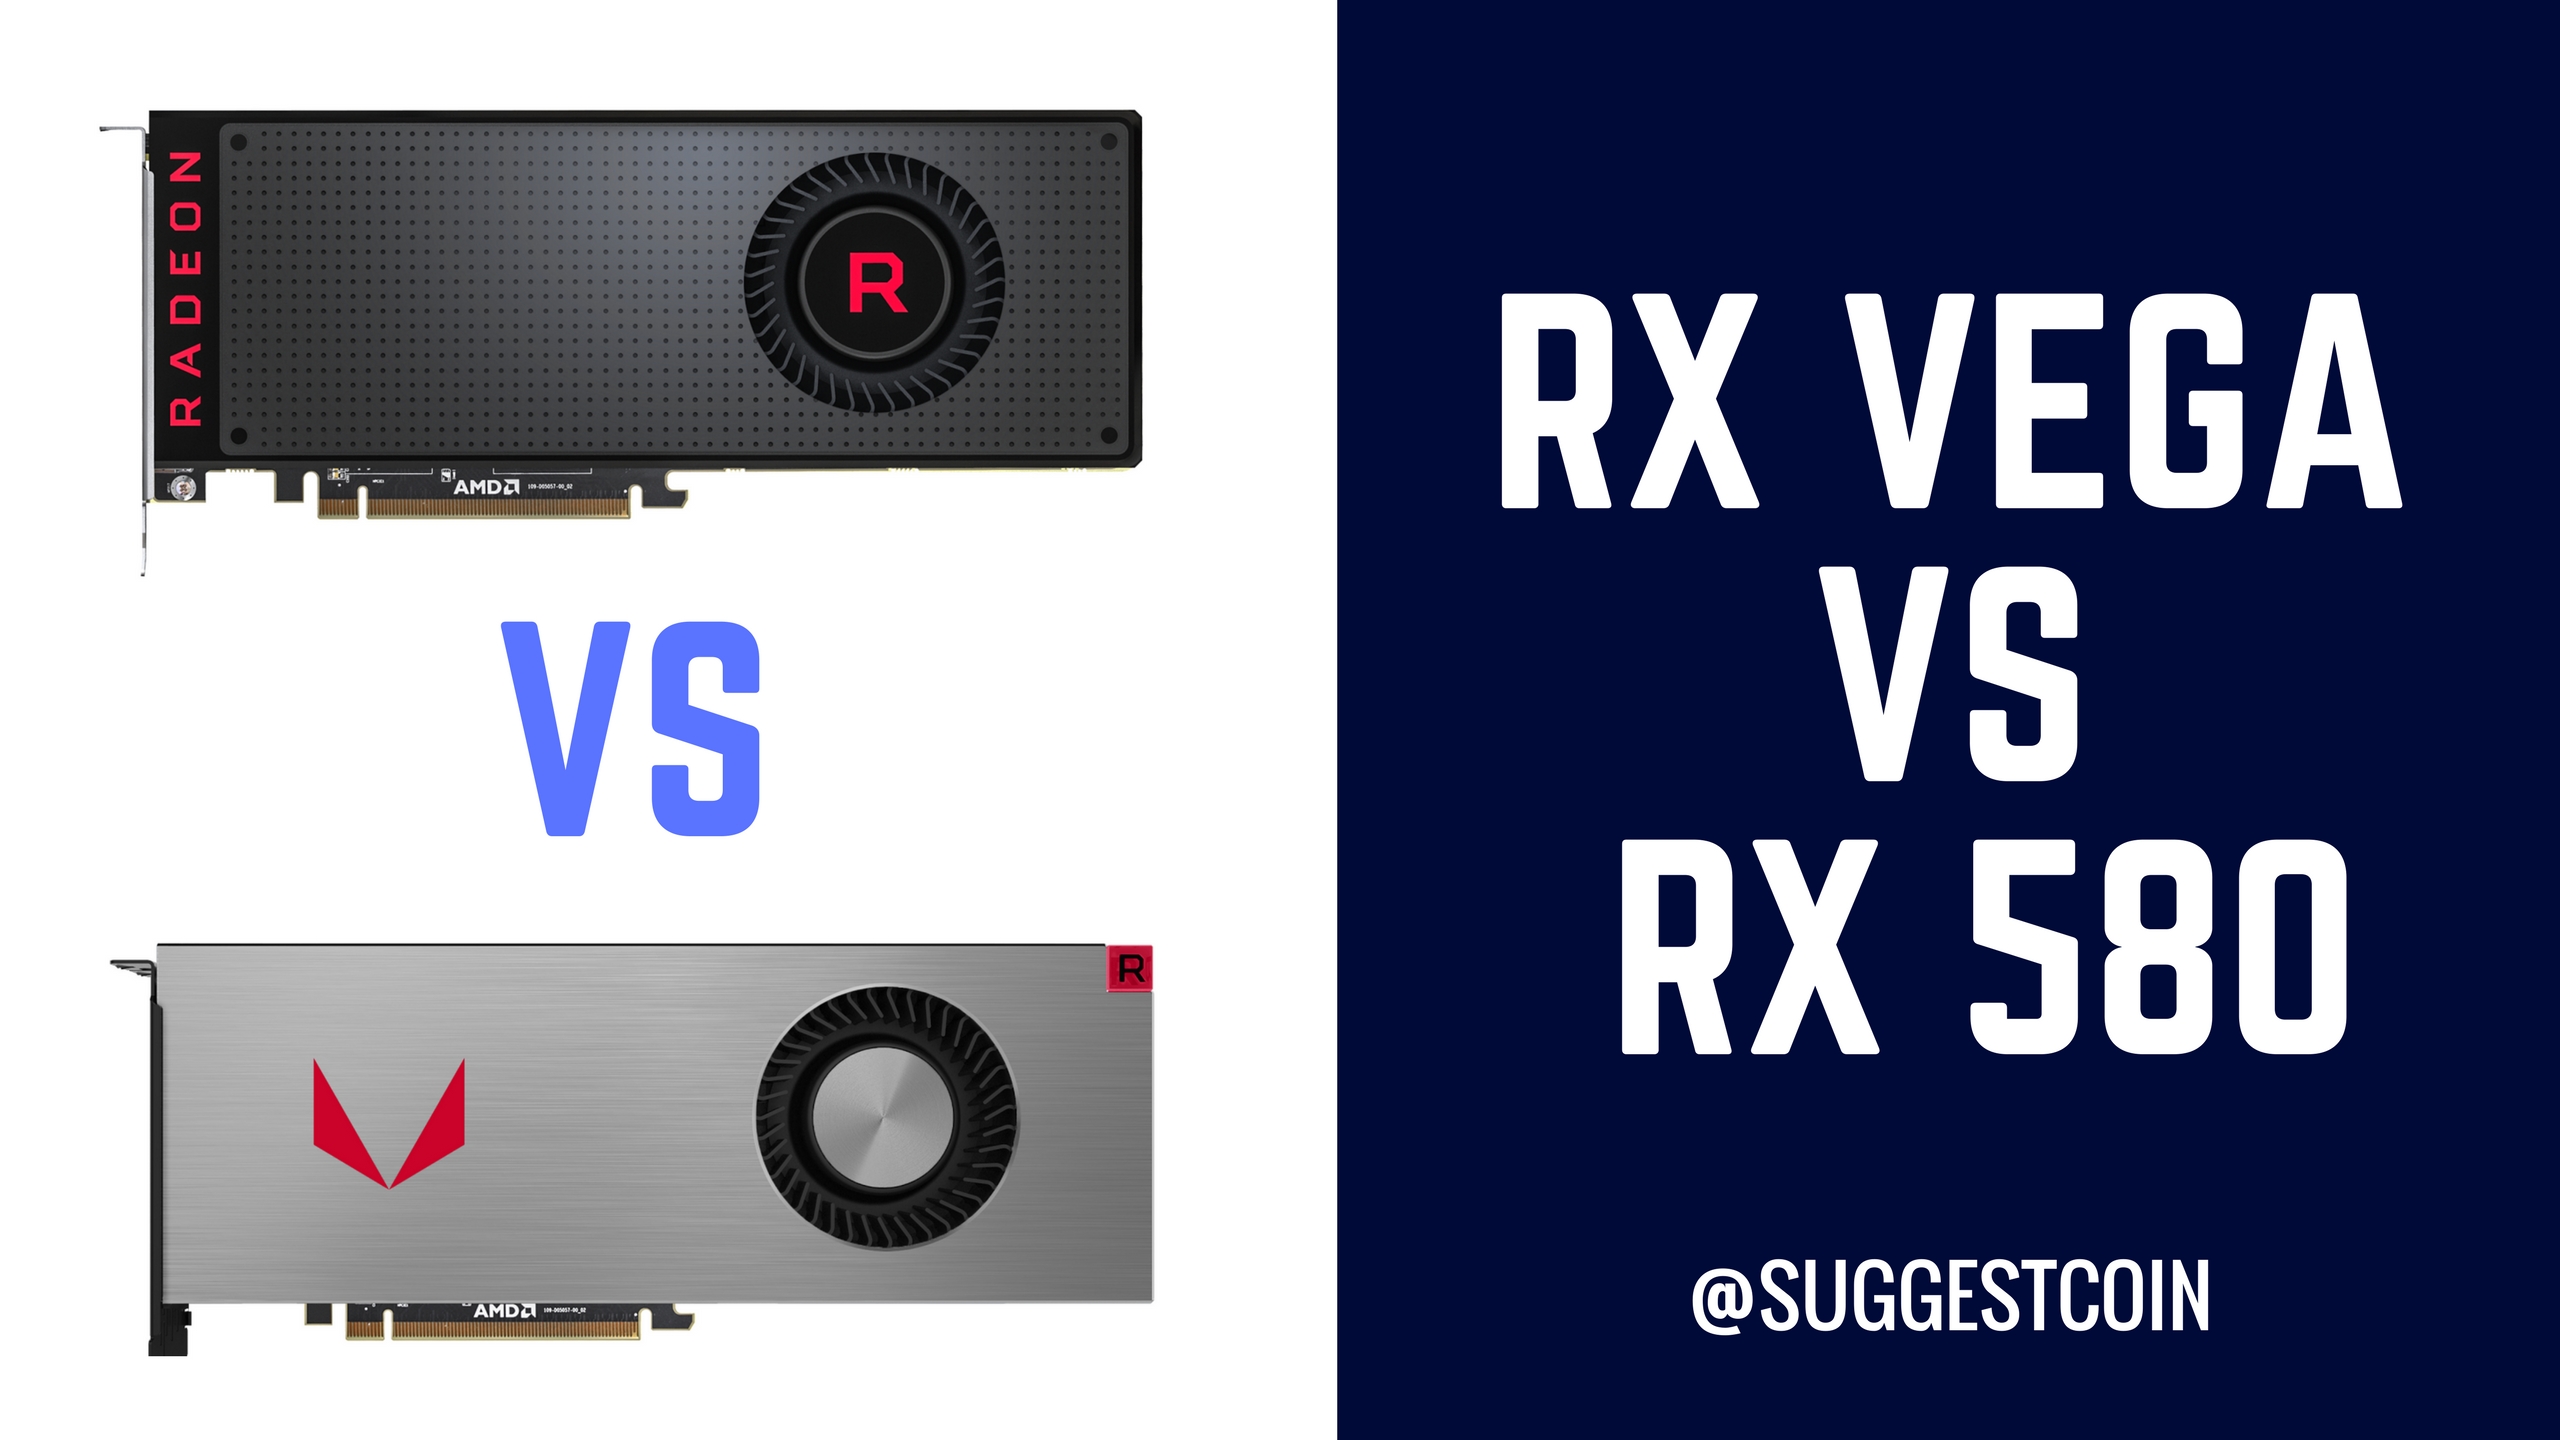 RX Vega Vs RX 580 – Which One Should You Choose For Mining?